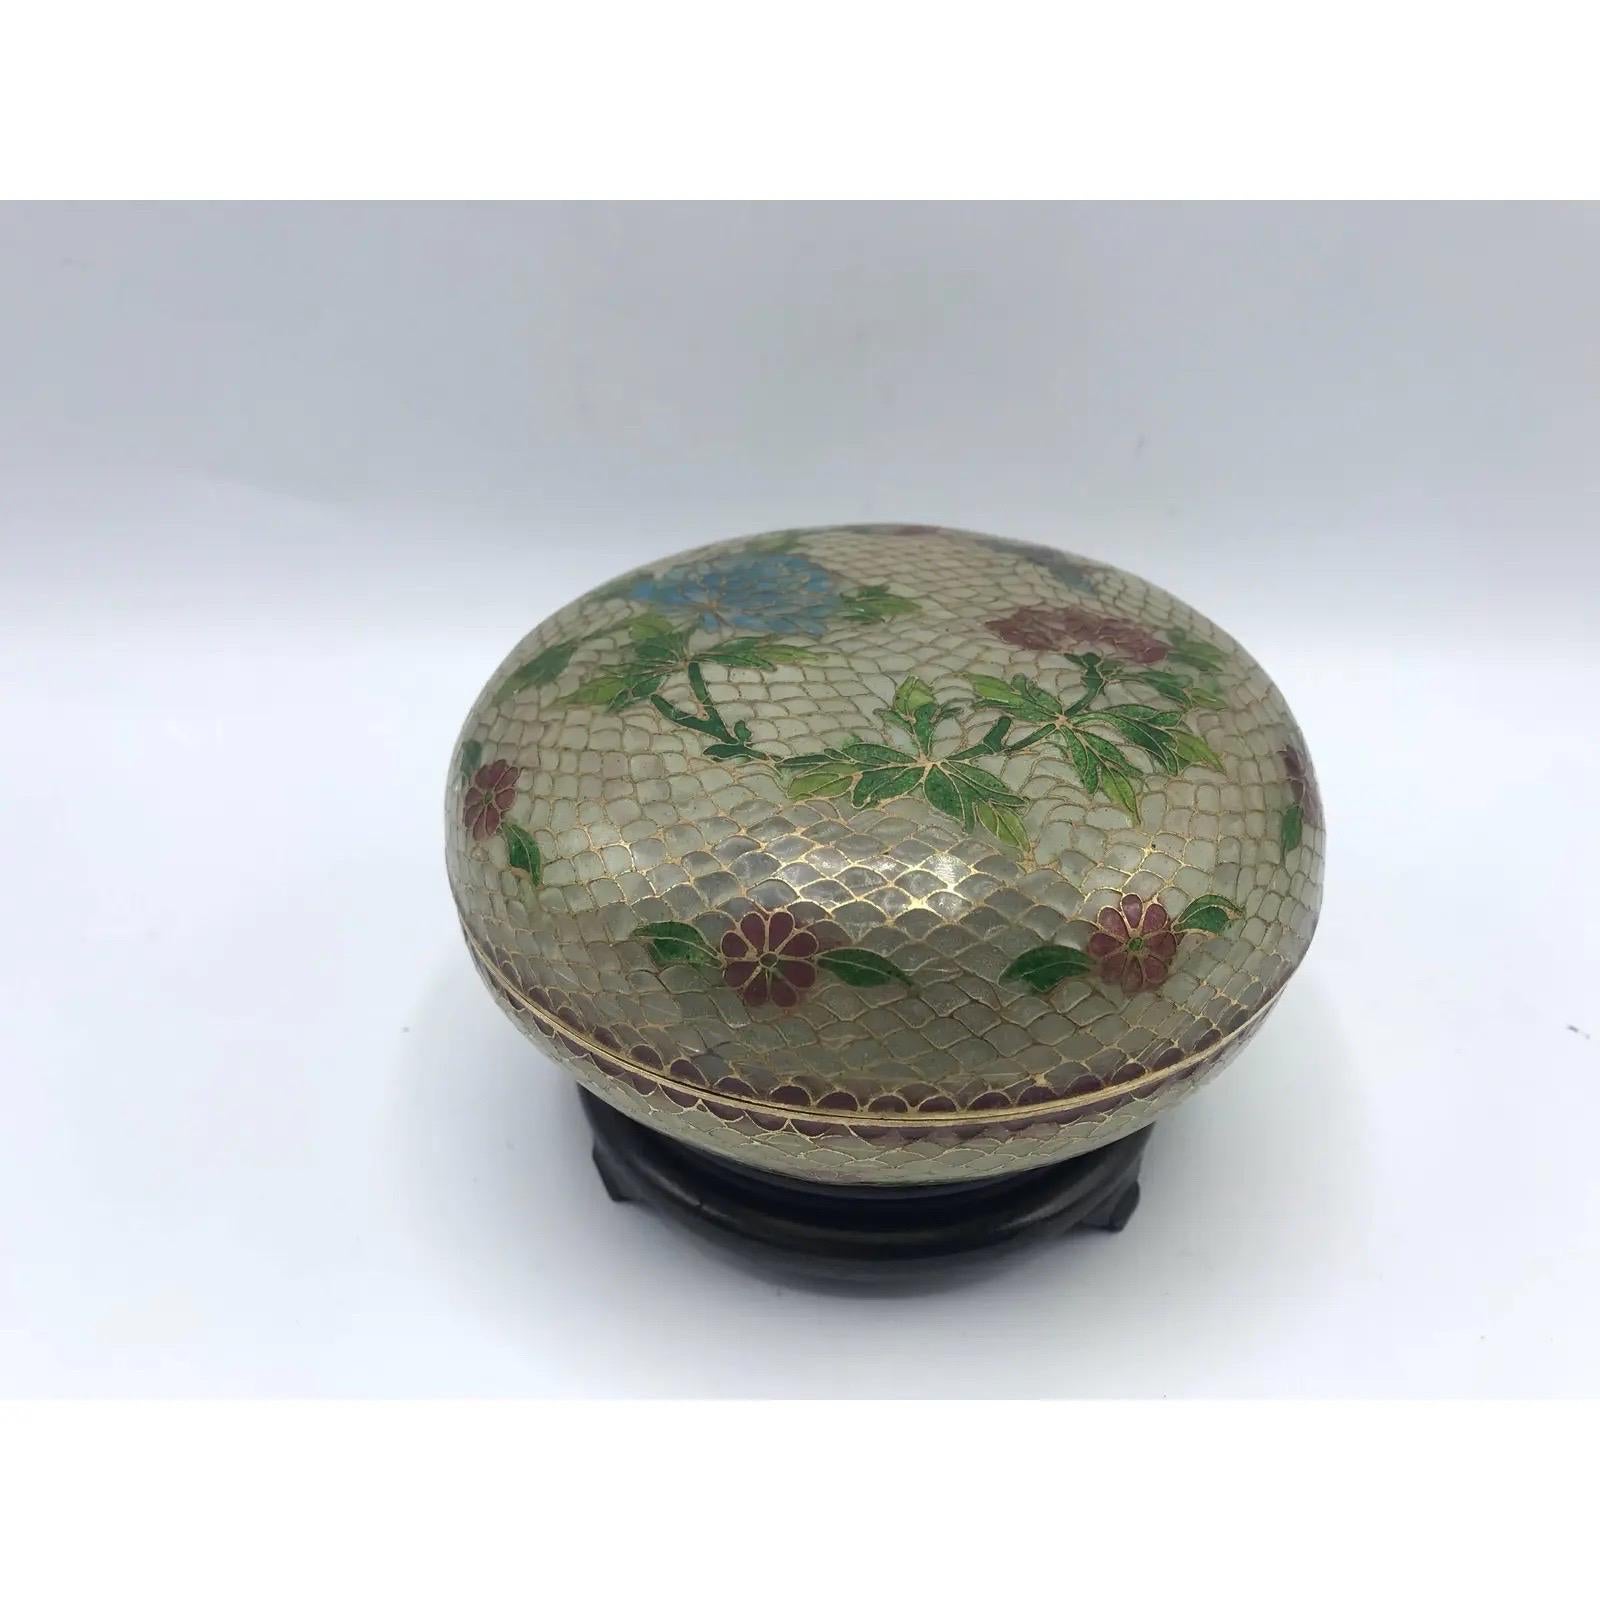 Offered is an exquisite, late 19th century French Art Nouveau, Plique a Jour cloisonné-enamel lidded bowl on a decorative wood stand. The piece has a gorgeous butterfly and floral-inlaid motif all over.

Dimensions:
With stand, 3.75” tall. 
Without